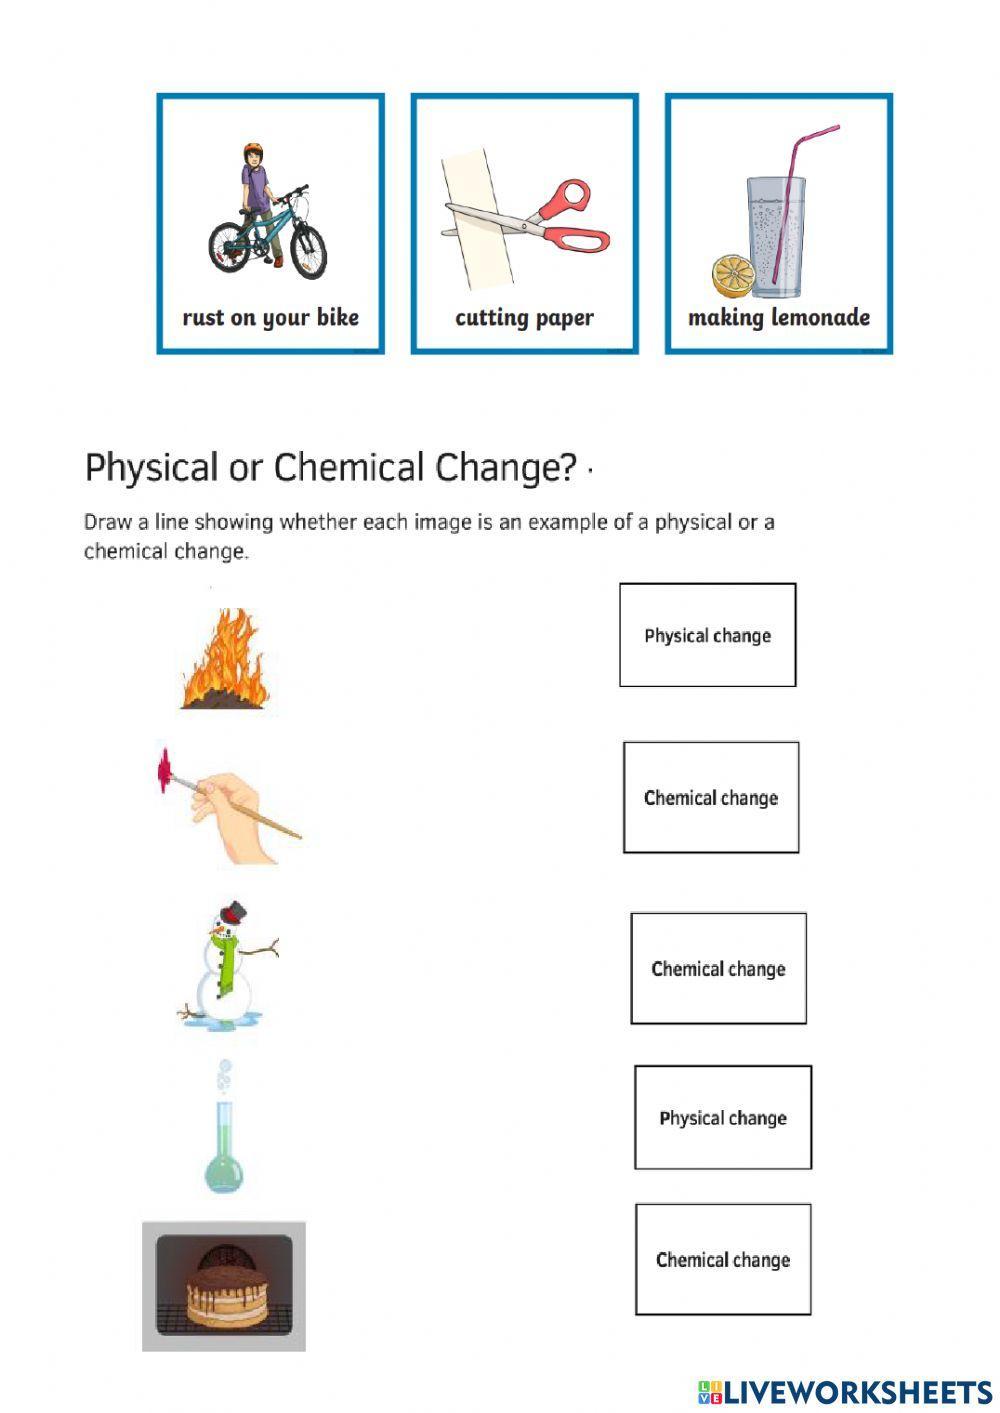 Physical and Chemical changes